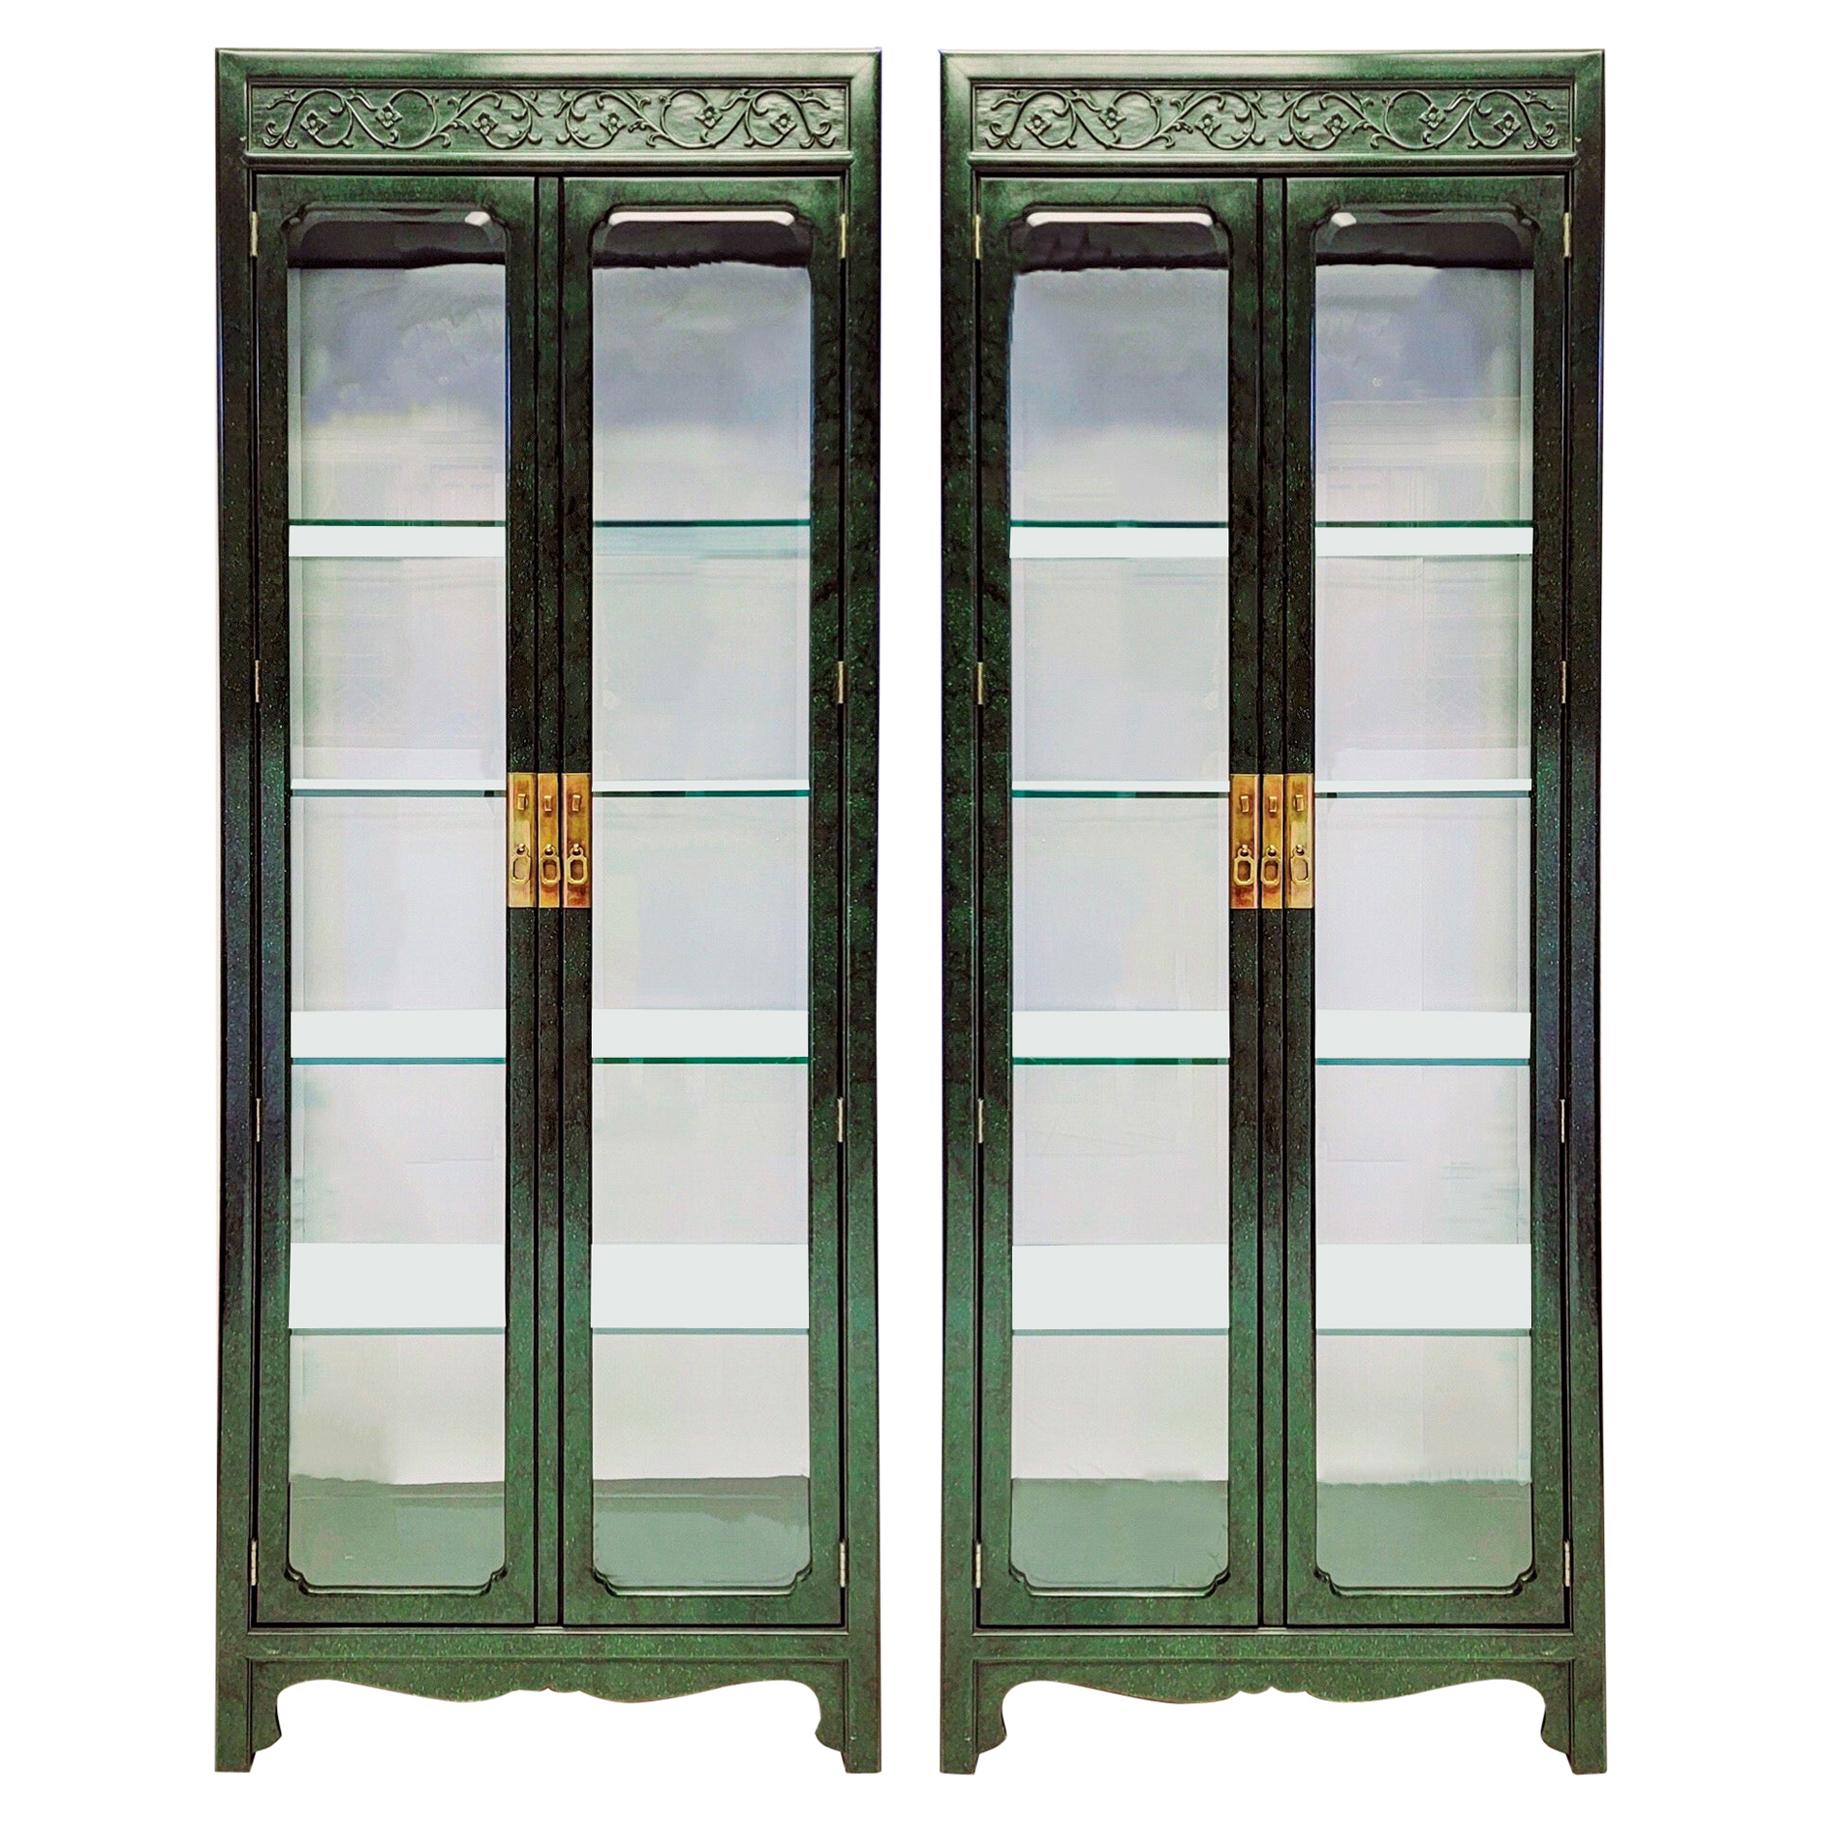 1970s Faux Malachite Asian Style Cabinets By Henredon -A Pair